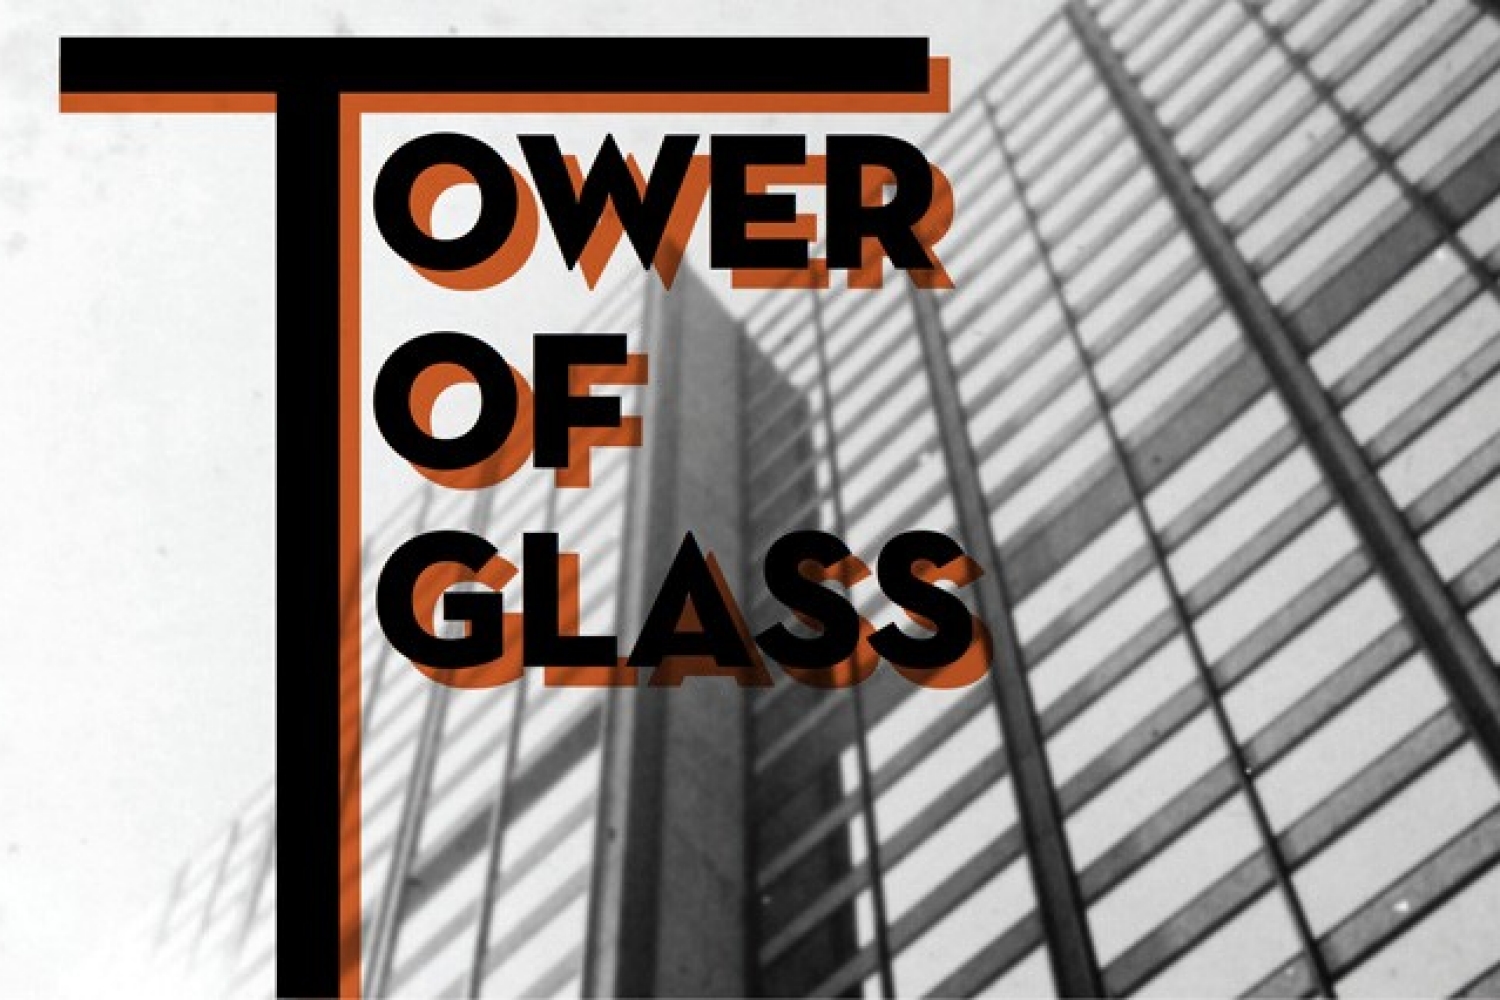 Tower of glass graphic